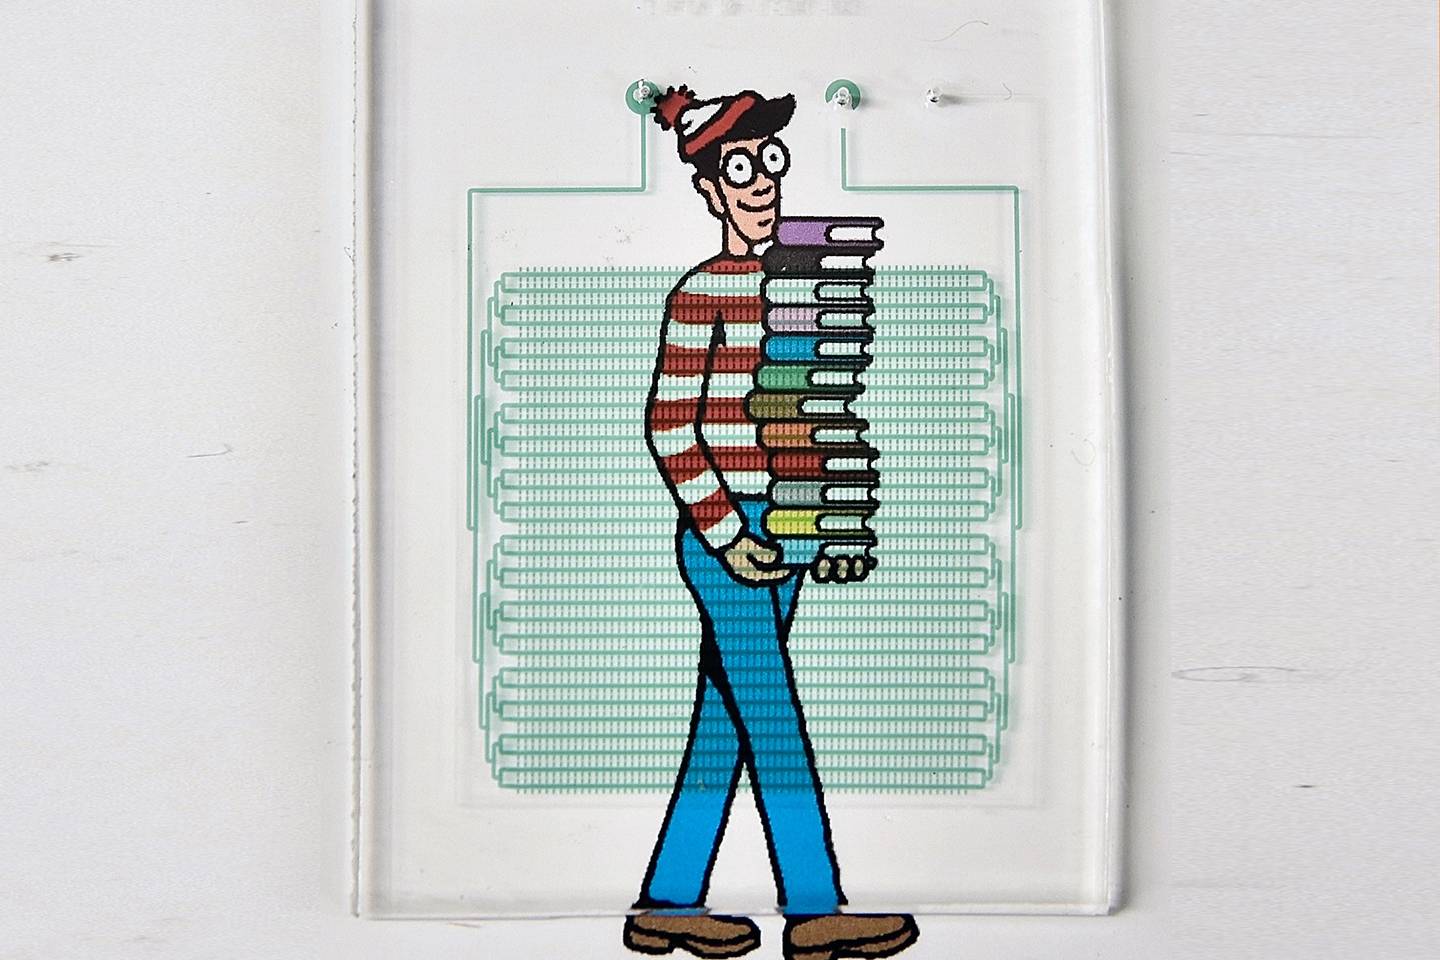 Waldo is displayed underneath a device that looks like a maze of tubes mounted on a board